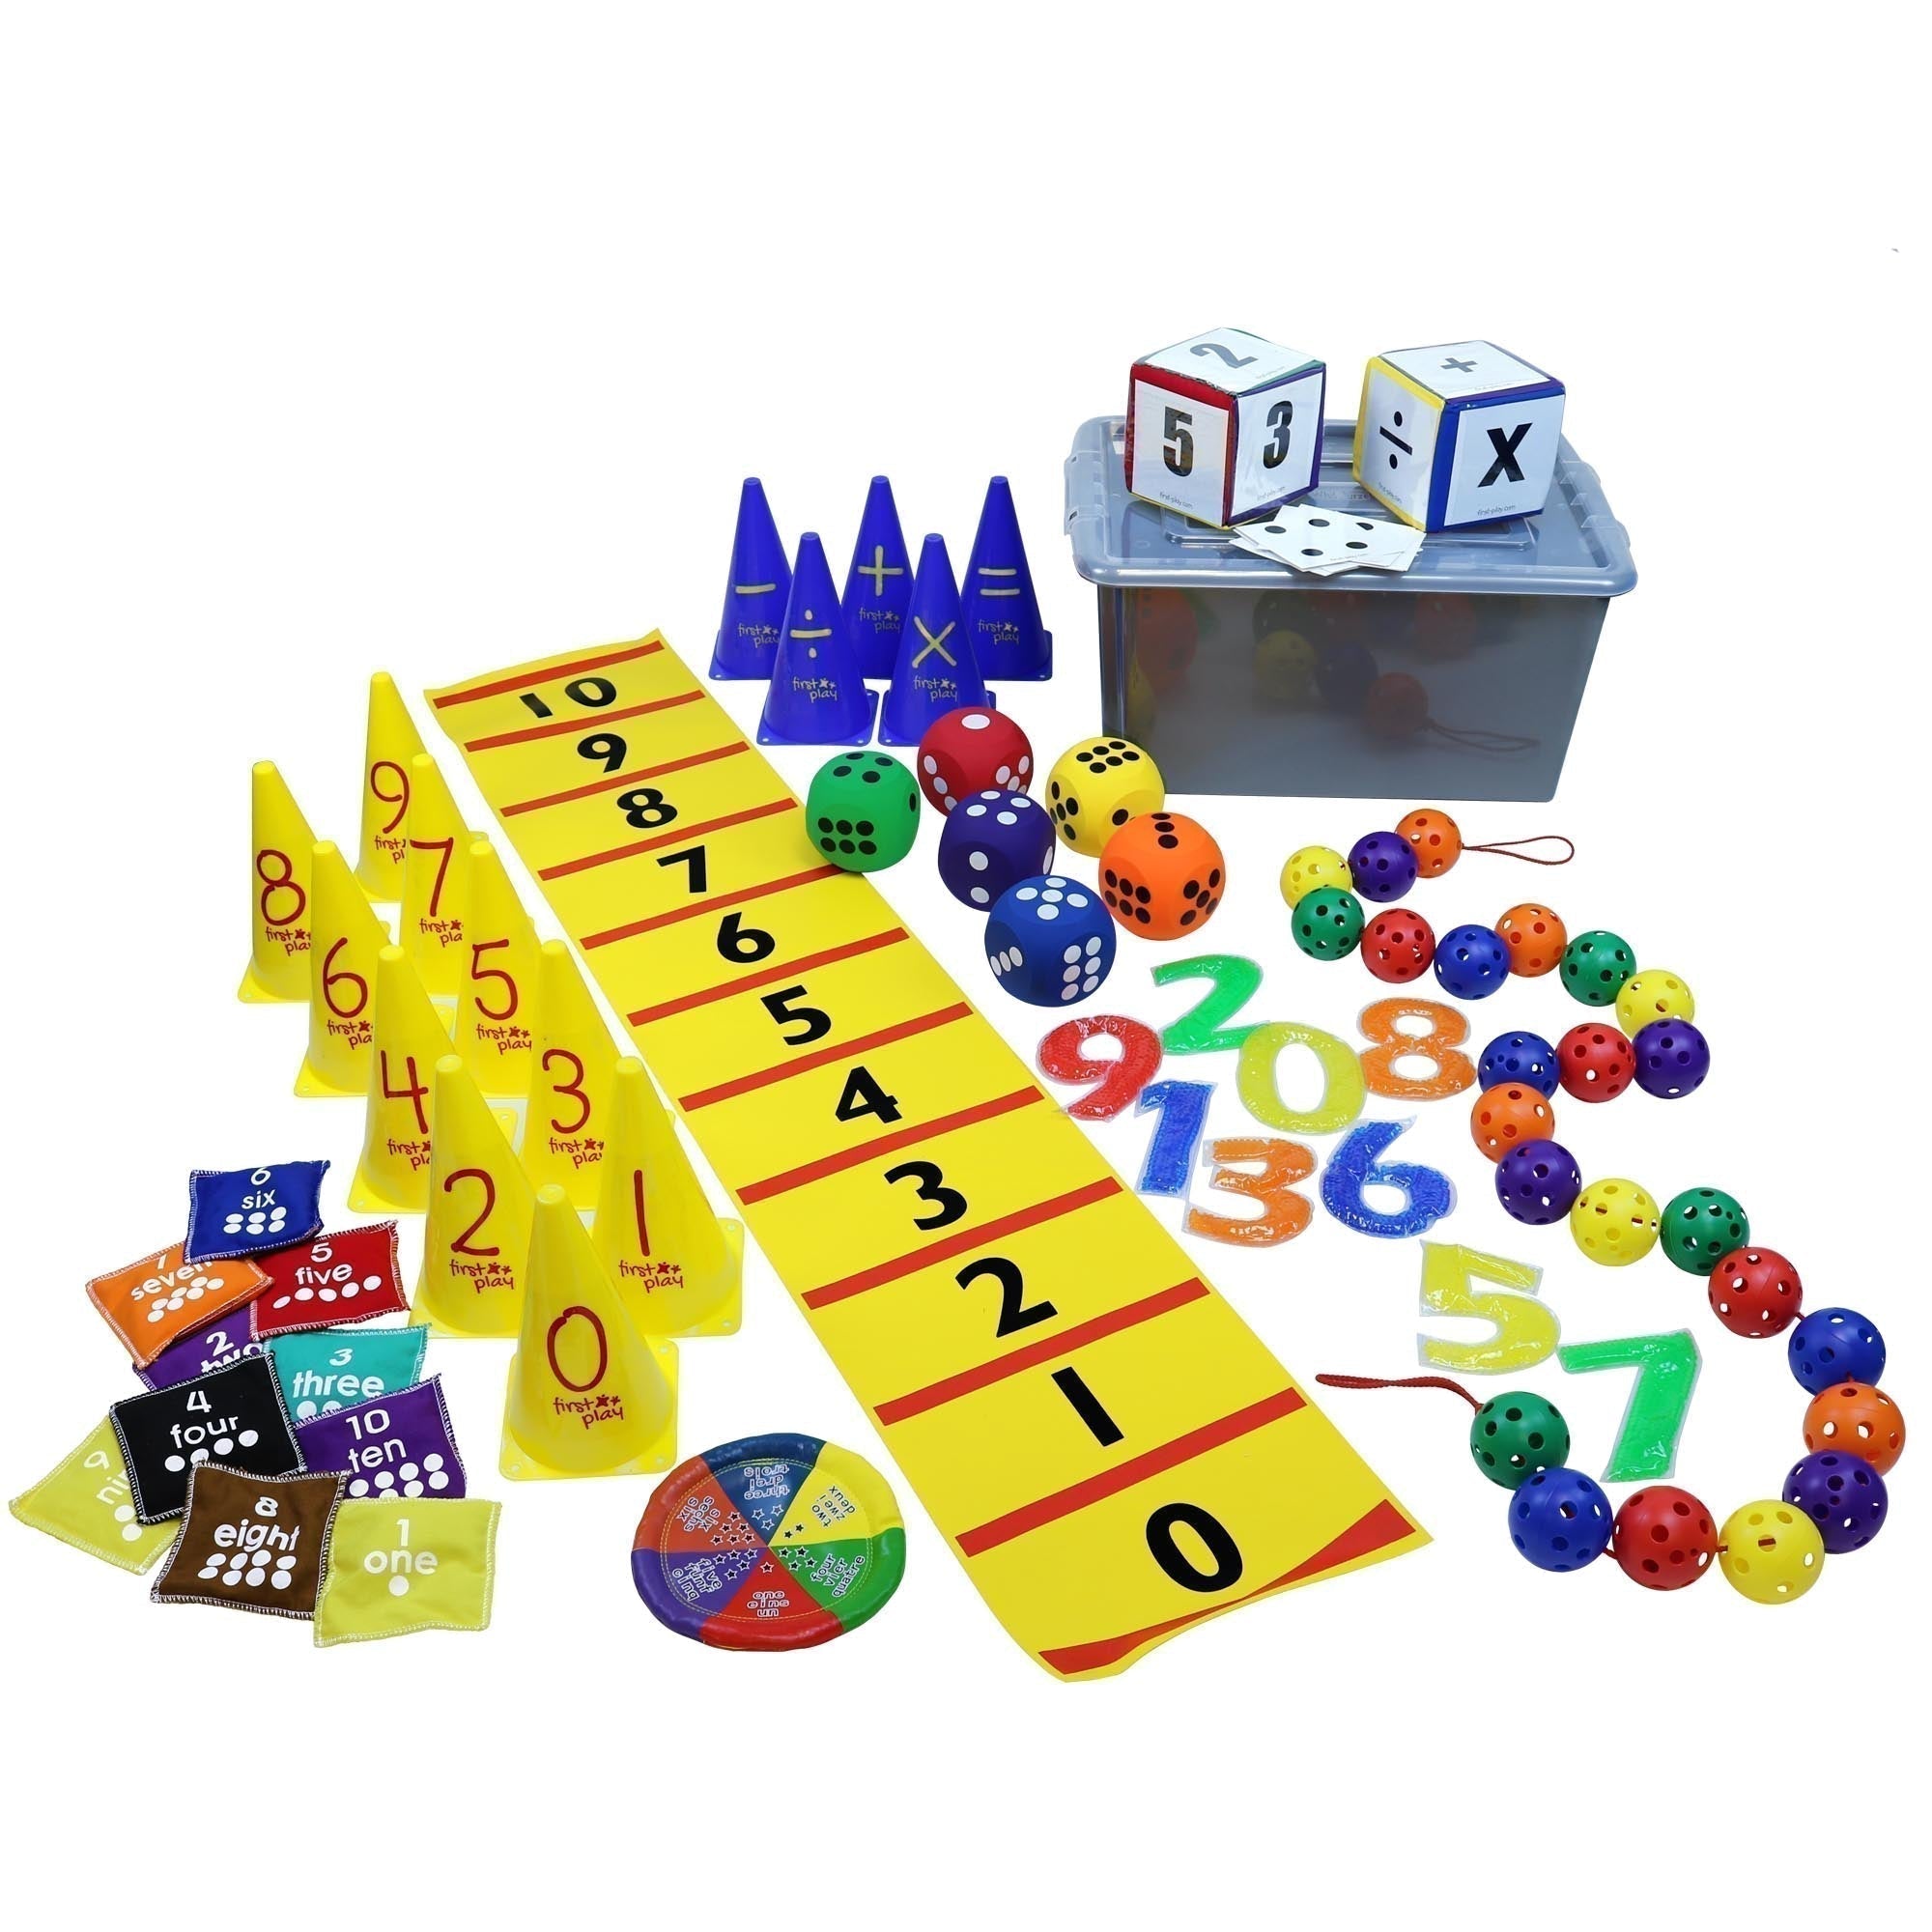 First play Maths Activity Chest, The First play Math's Activity Chest is an innovative kit specifically designed to integrate maths learning with physical activity. This unique approach aims to make learning numeracy fun, engaging, and interactive, while also promoting physical fitness. Key Features: Learn Numeracy Through Play: The kit's resources facilitate the understanding of mathematical concepts through interactive games and activities. Versatile Learning Environments: Ideal for both indoor and outdoo